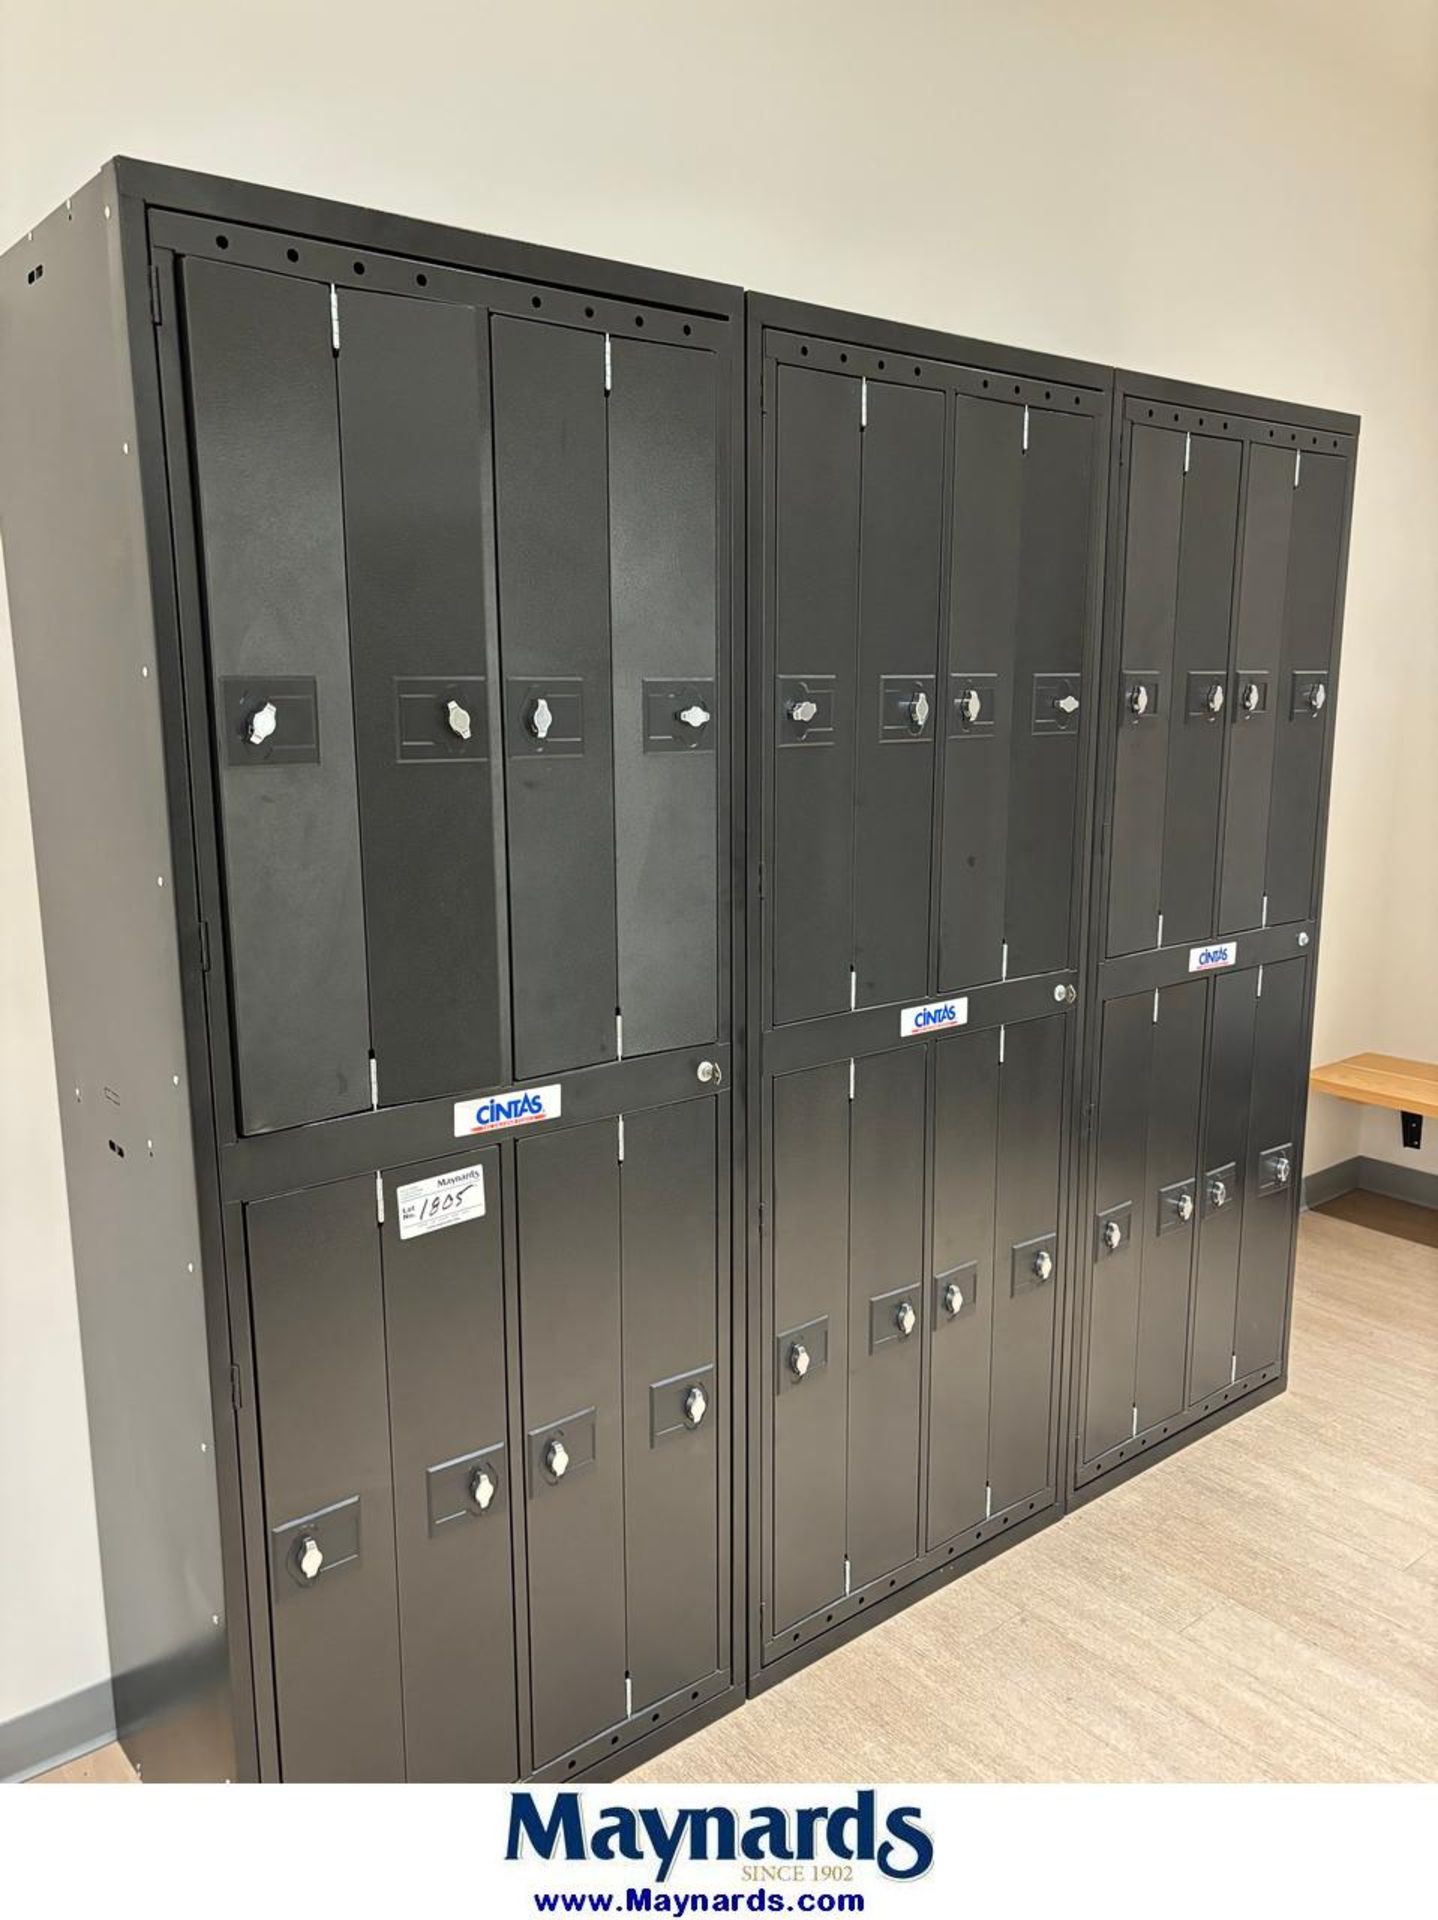 secions of lockers in mens and womens bathrooms - Image 2 of 2